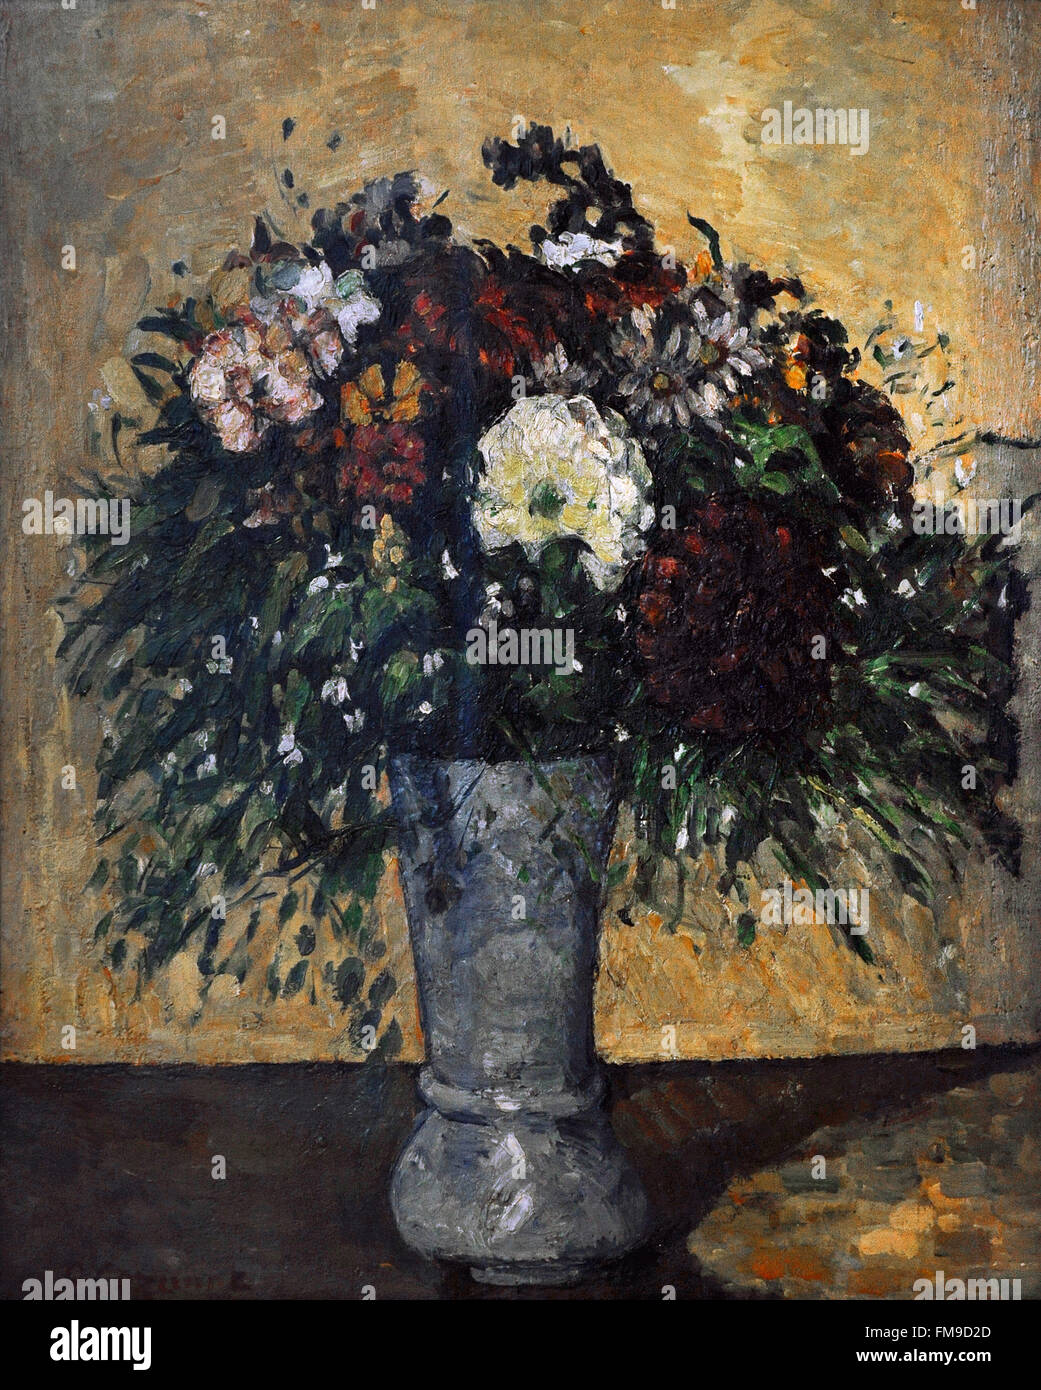 Paul Cézanne (1839-1906). French painter. Bouquet of flowers in a vase, ca. 1877. Oil on canvas. The State Hermitage Museum. Saint Petersburg. Russia. Stock Photo